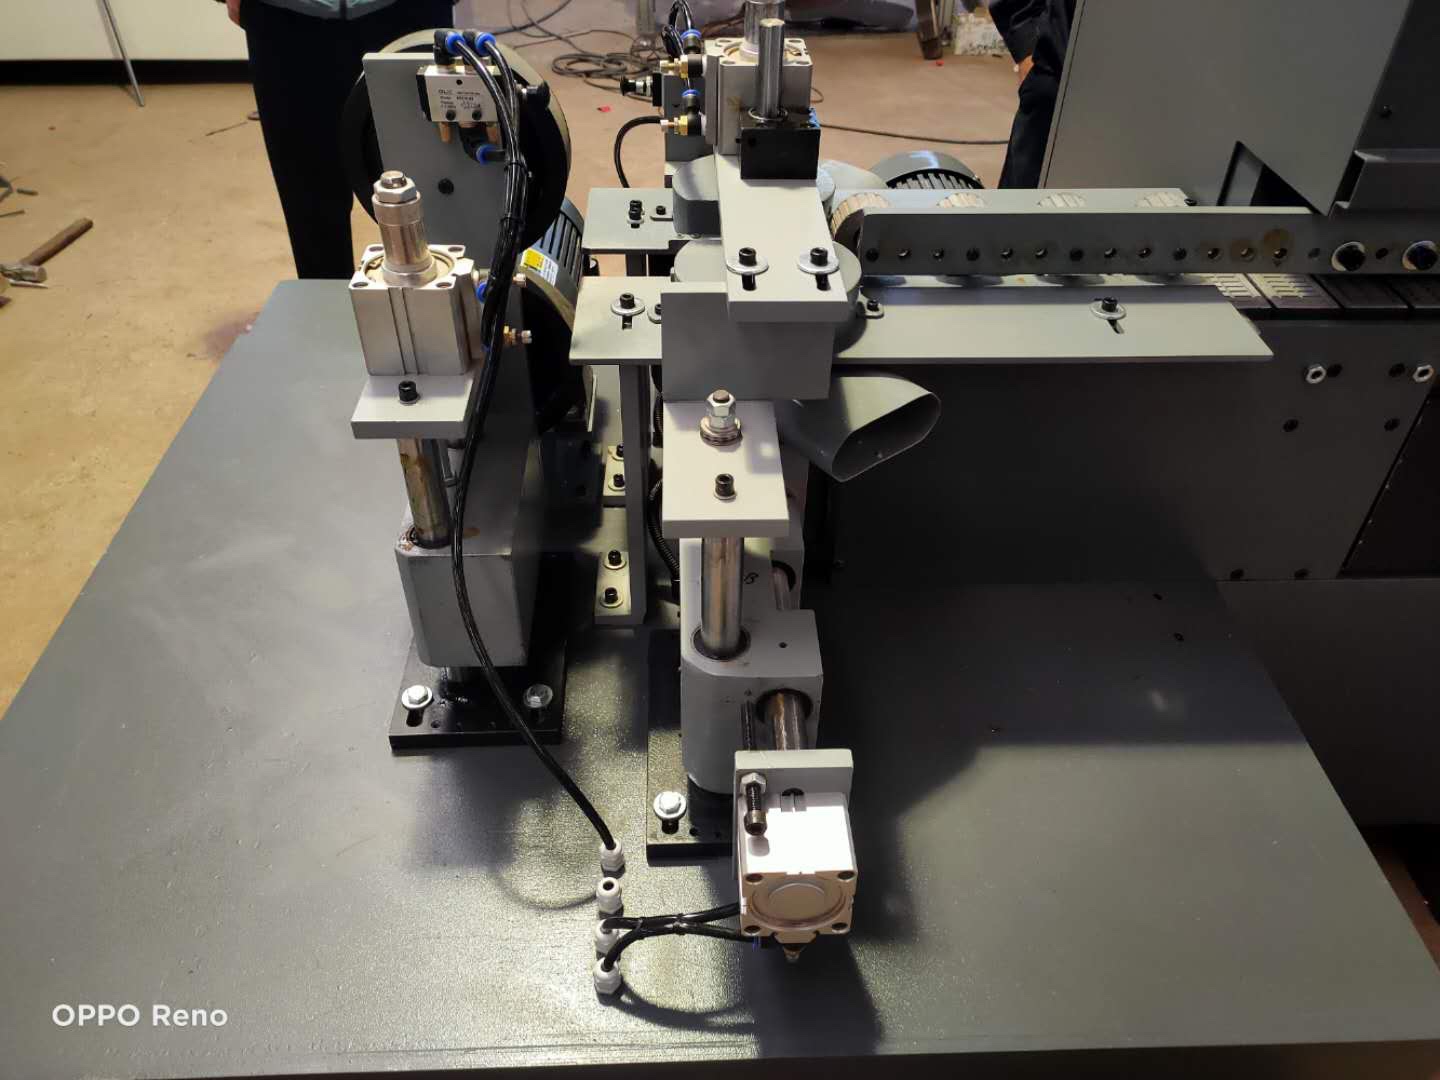 Automatic High Speed Milling Corner Trimming and End Milling Edge Banding Machine Manufacturers, Automatic High Speed Milling Corner Trimming and End Milling Edge Banding Machine Factory, Supply Automatic High Speed Milling Corner Trimming and End Milling Edge Banding Machine